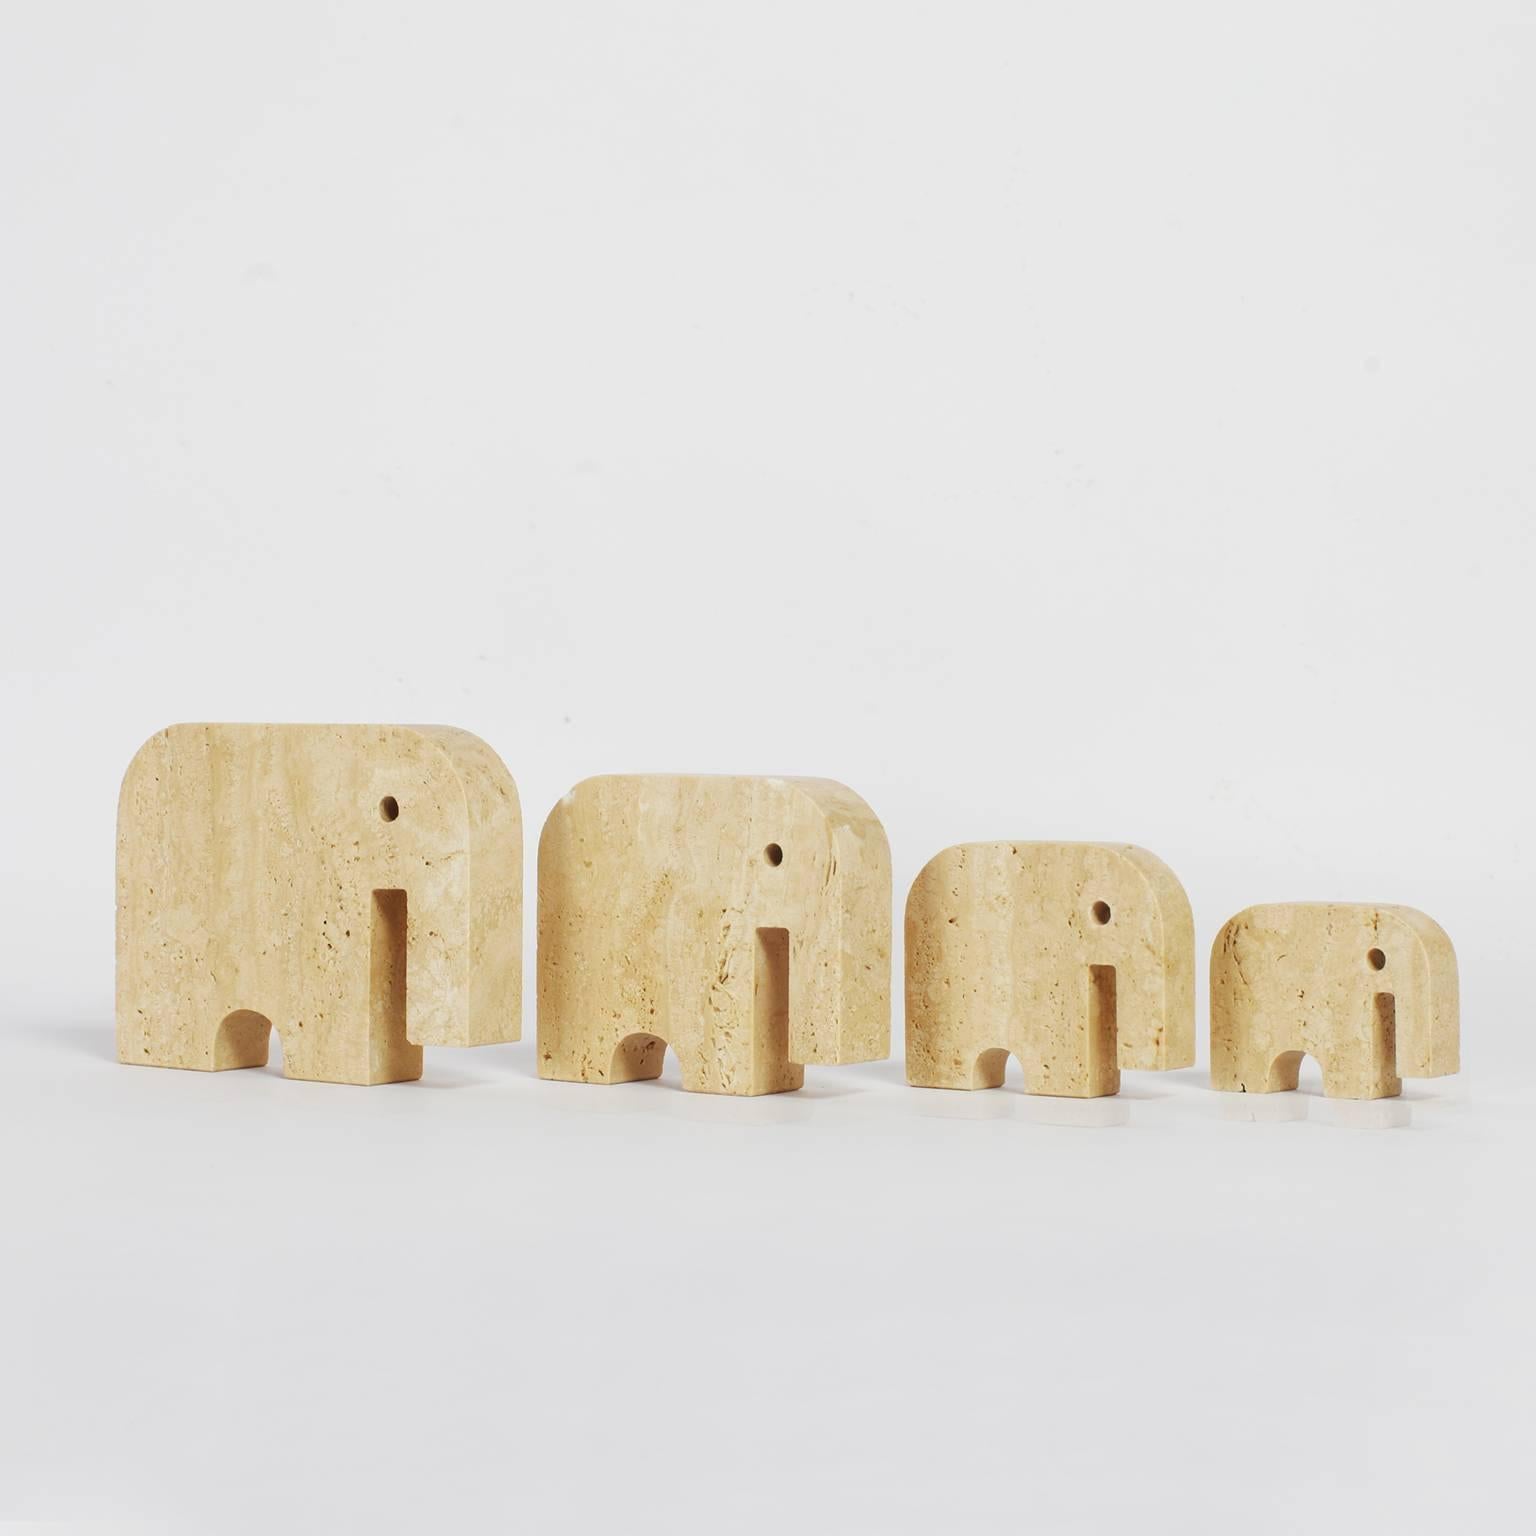 Four in ascending sizes, stylized elephants made in travertine,
designed by Fratelli Mannelli Italy in the 1970s.

Dimensions: Largest 11.5 x 15 x 3 cm (HxWxD) 
Second largest 10 x 12 x 3 cm (HxWxD) 
Third largest 8 x 10 x 2 cm (HxWxD)